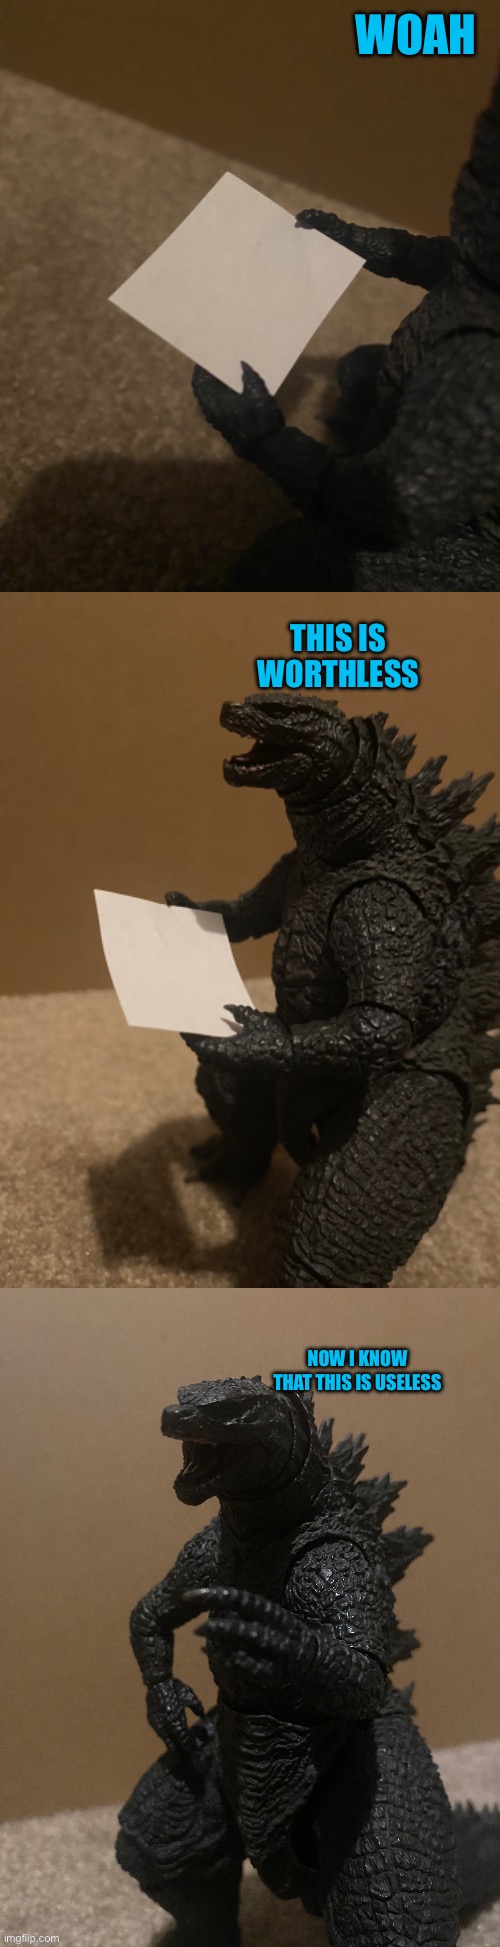 High Quality This is worthless (Godzilla Edition) Blank Meme Template